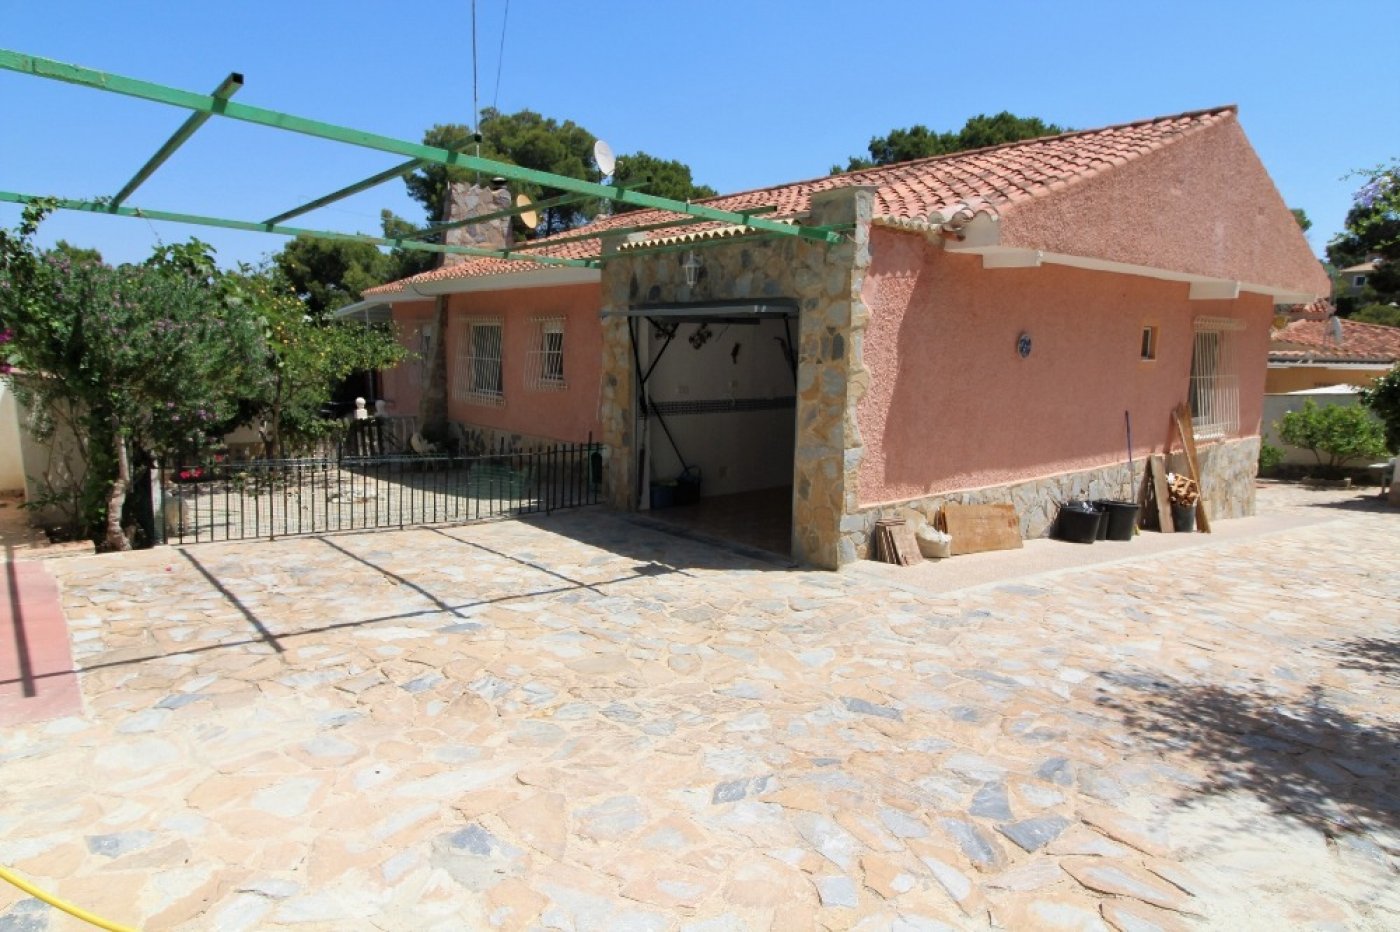 INDEPENDENT VILLA, 5 BEDROOMS, LARGE GARDEN WITH POOL + ACCOMMODATION (independent)